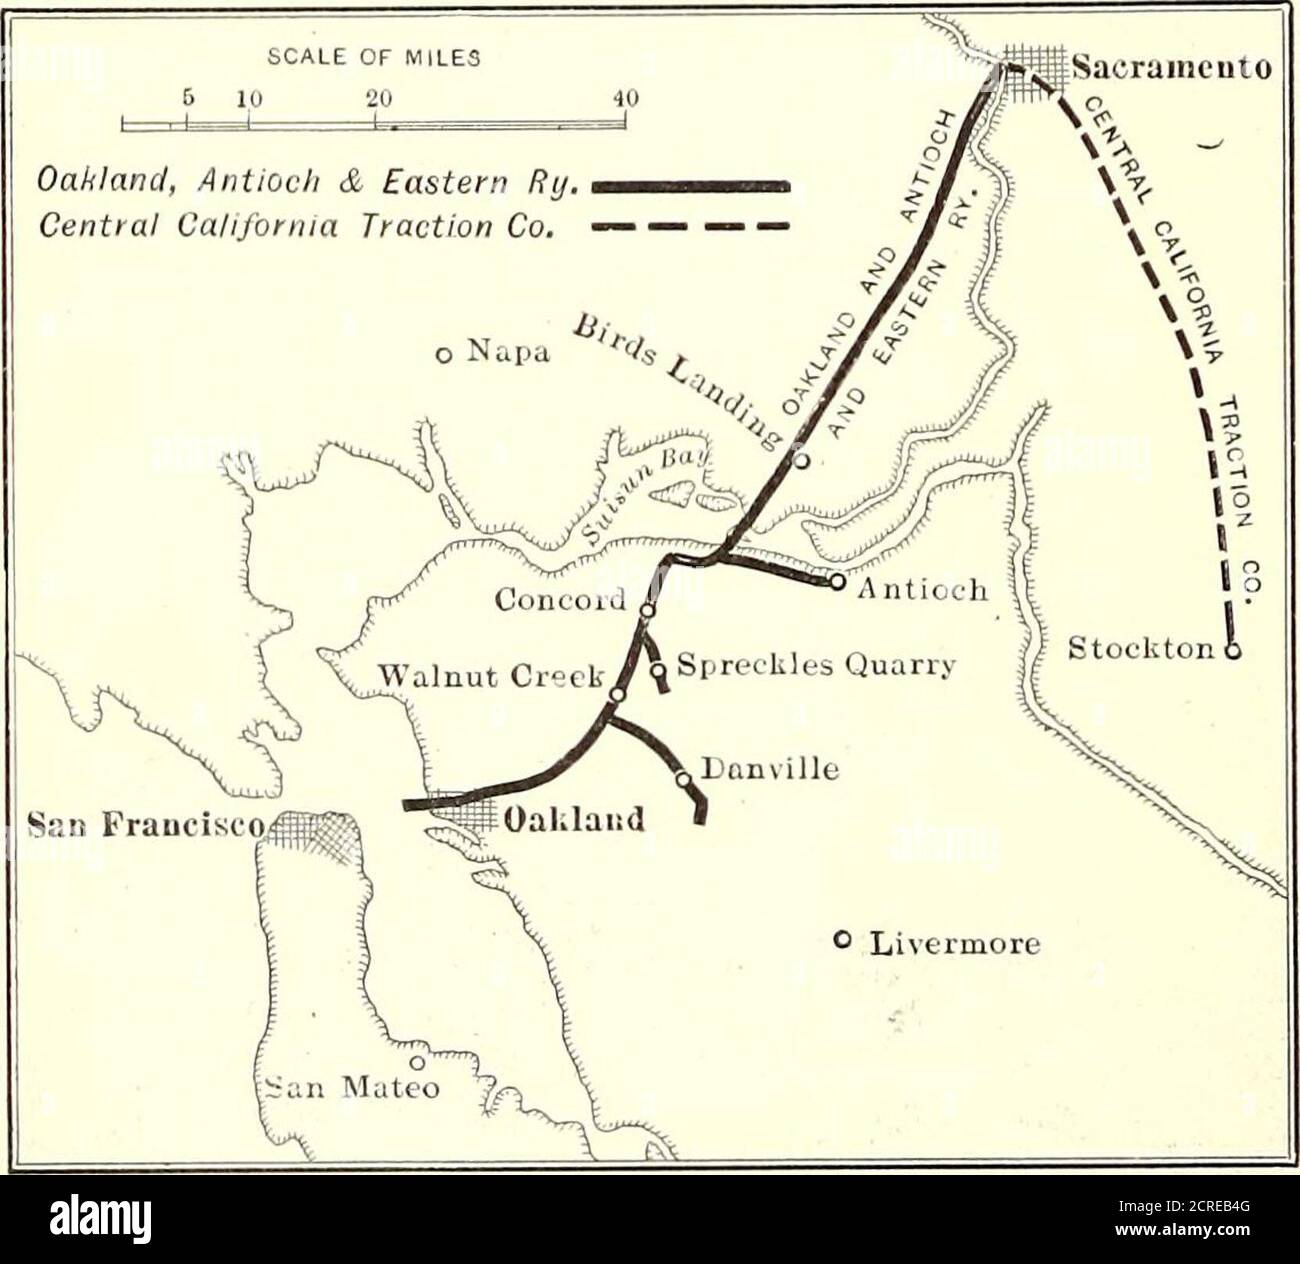 . Electric railway journal . Oakland, Antioch & Eastern—Concrete Tunnel Section will be transmitted from Bay Point beneath the surface bytwo submarine cables, 250,000 circ. mils, 3/32-in. Pararubber taped, wound with 1/16-in. varnished cloth and in-closed in jii-m. plain lead sheath, with No. B. W. G. gal-vanized armor, and a jute and lime finish over all. Twotelephone cables will be laid beside the power cable. Eachwill consist of two pairs of No. 16 B. & S. G strand, in-sulated with three wraps of dry paper, 3/32-in. lead sheathand No. 10 B. W. G. galvanized armor.. £Uctnc Ry.Jou.mal Oakland Stock Photo